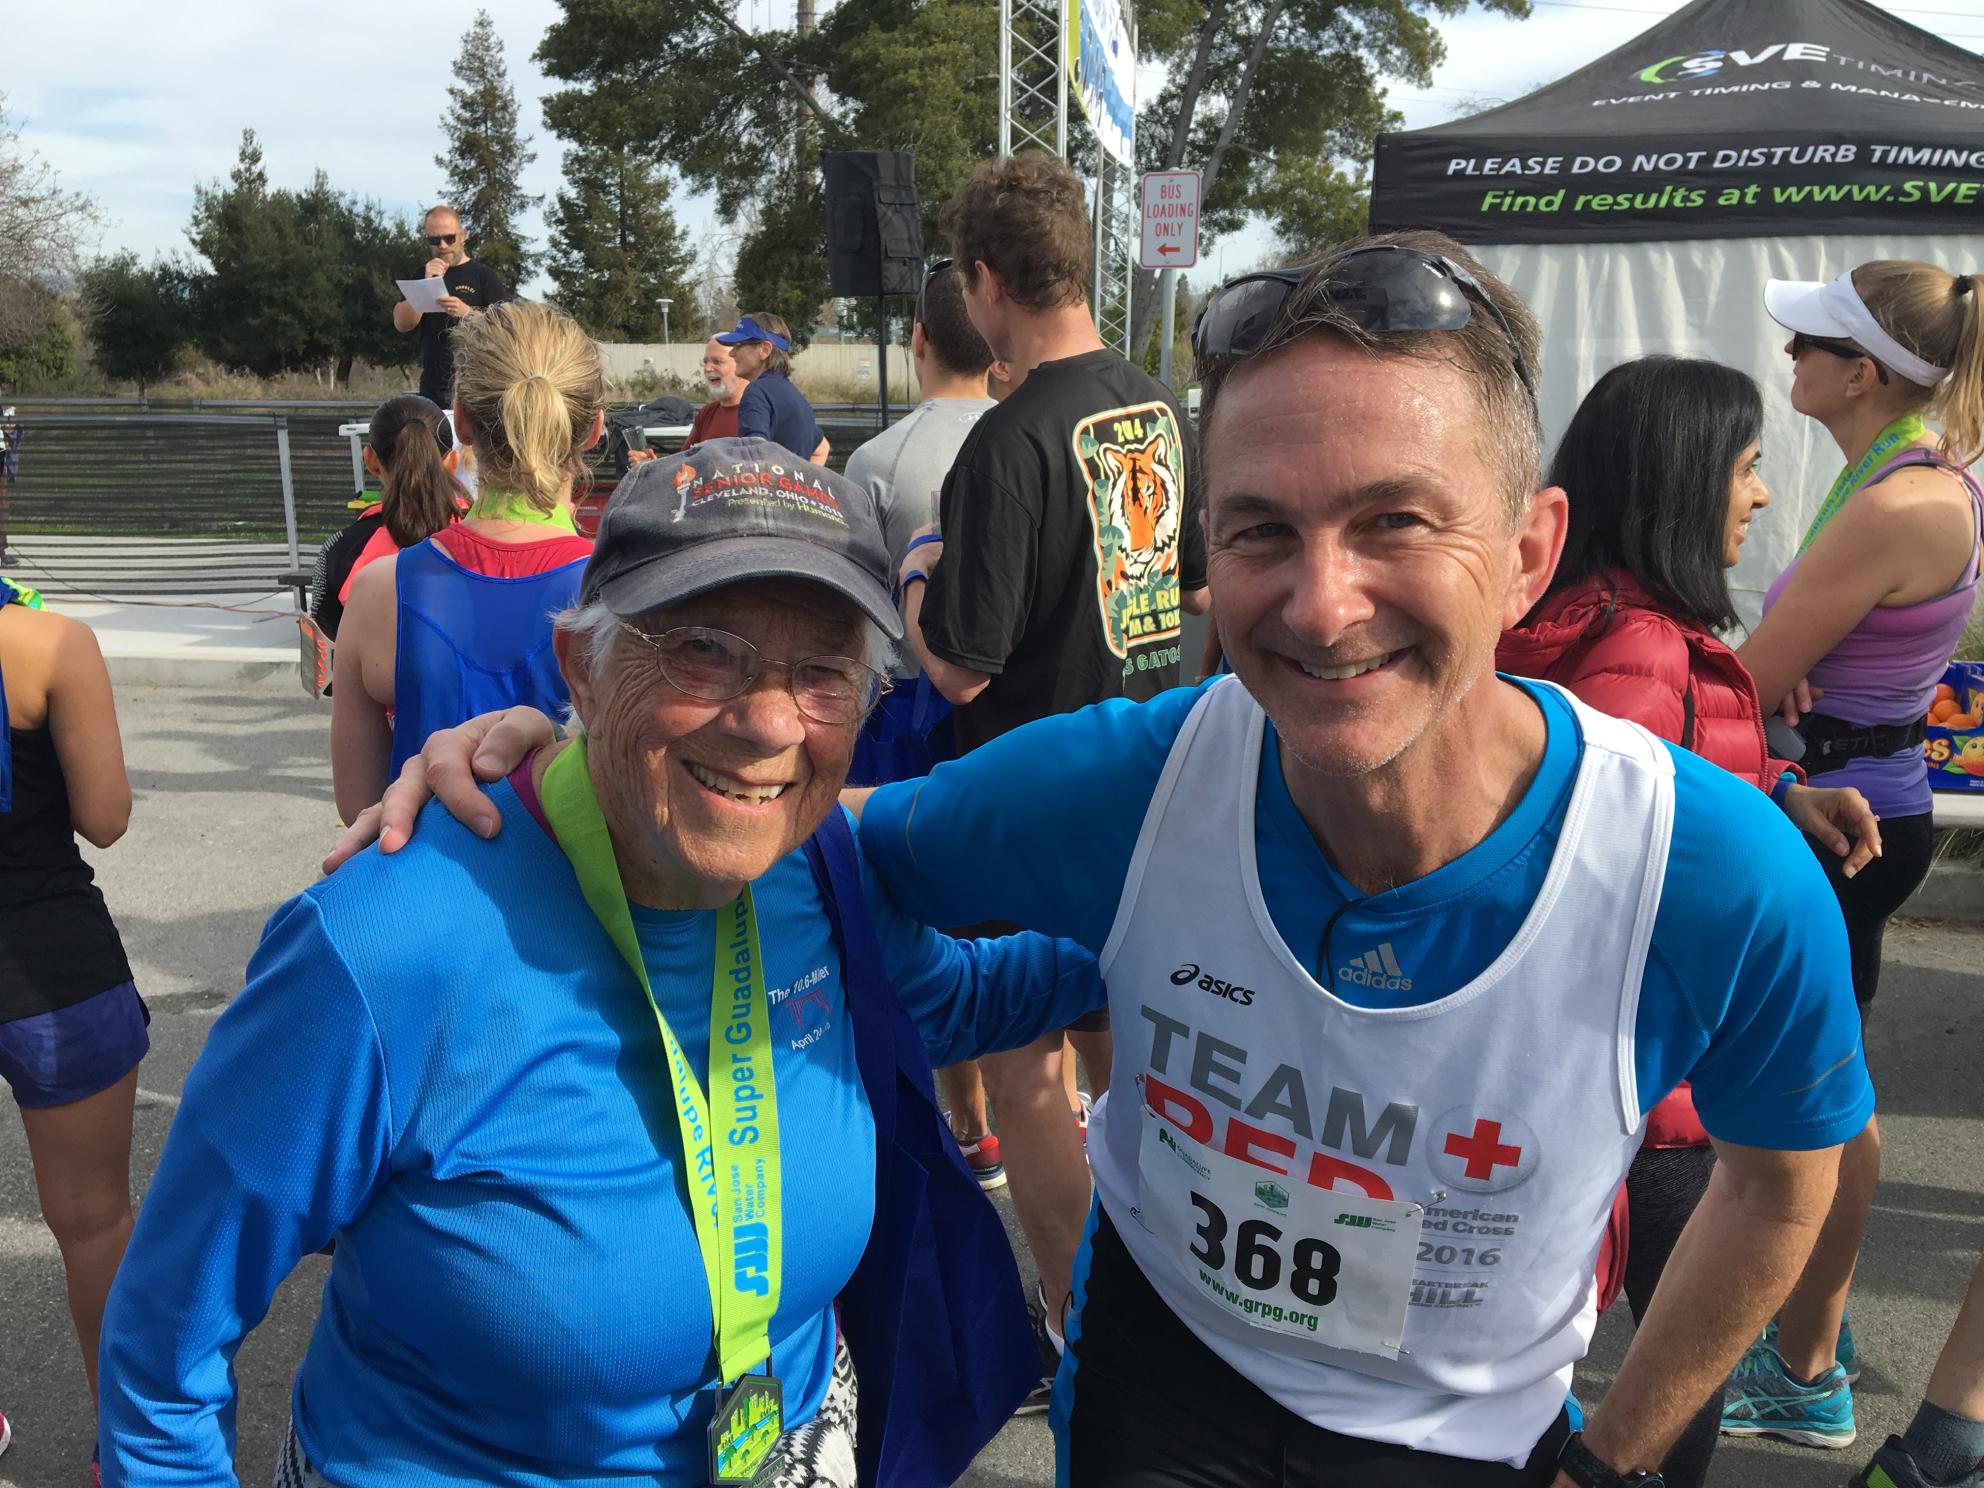 CEO Eric Thornburg standing with Phyllis, a 93 year old runner